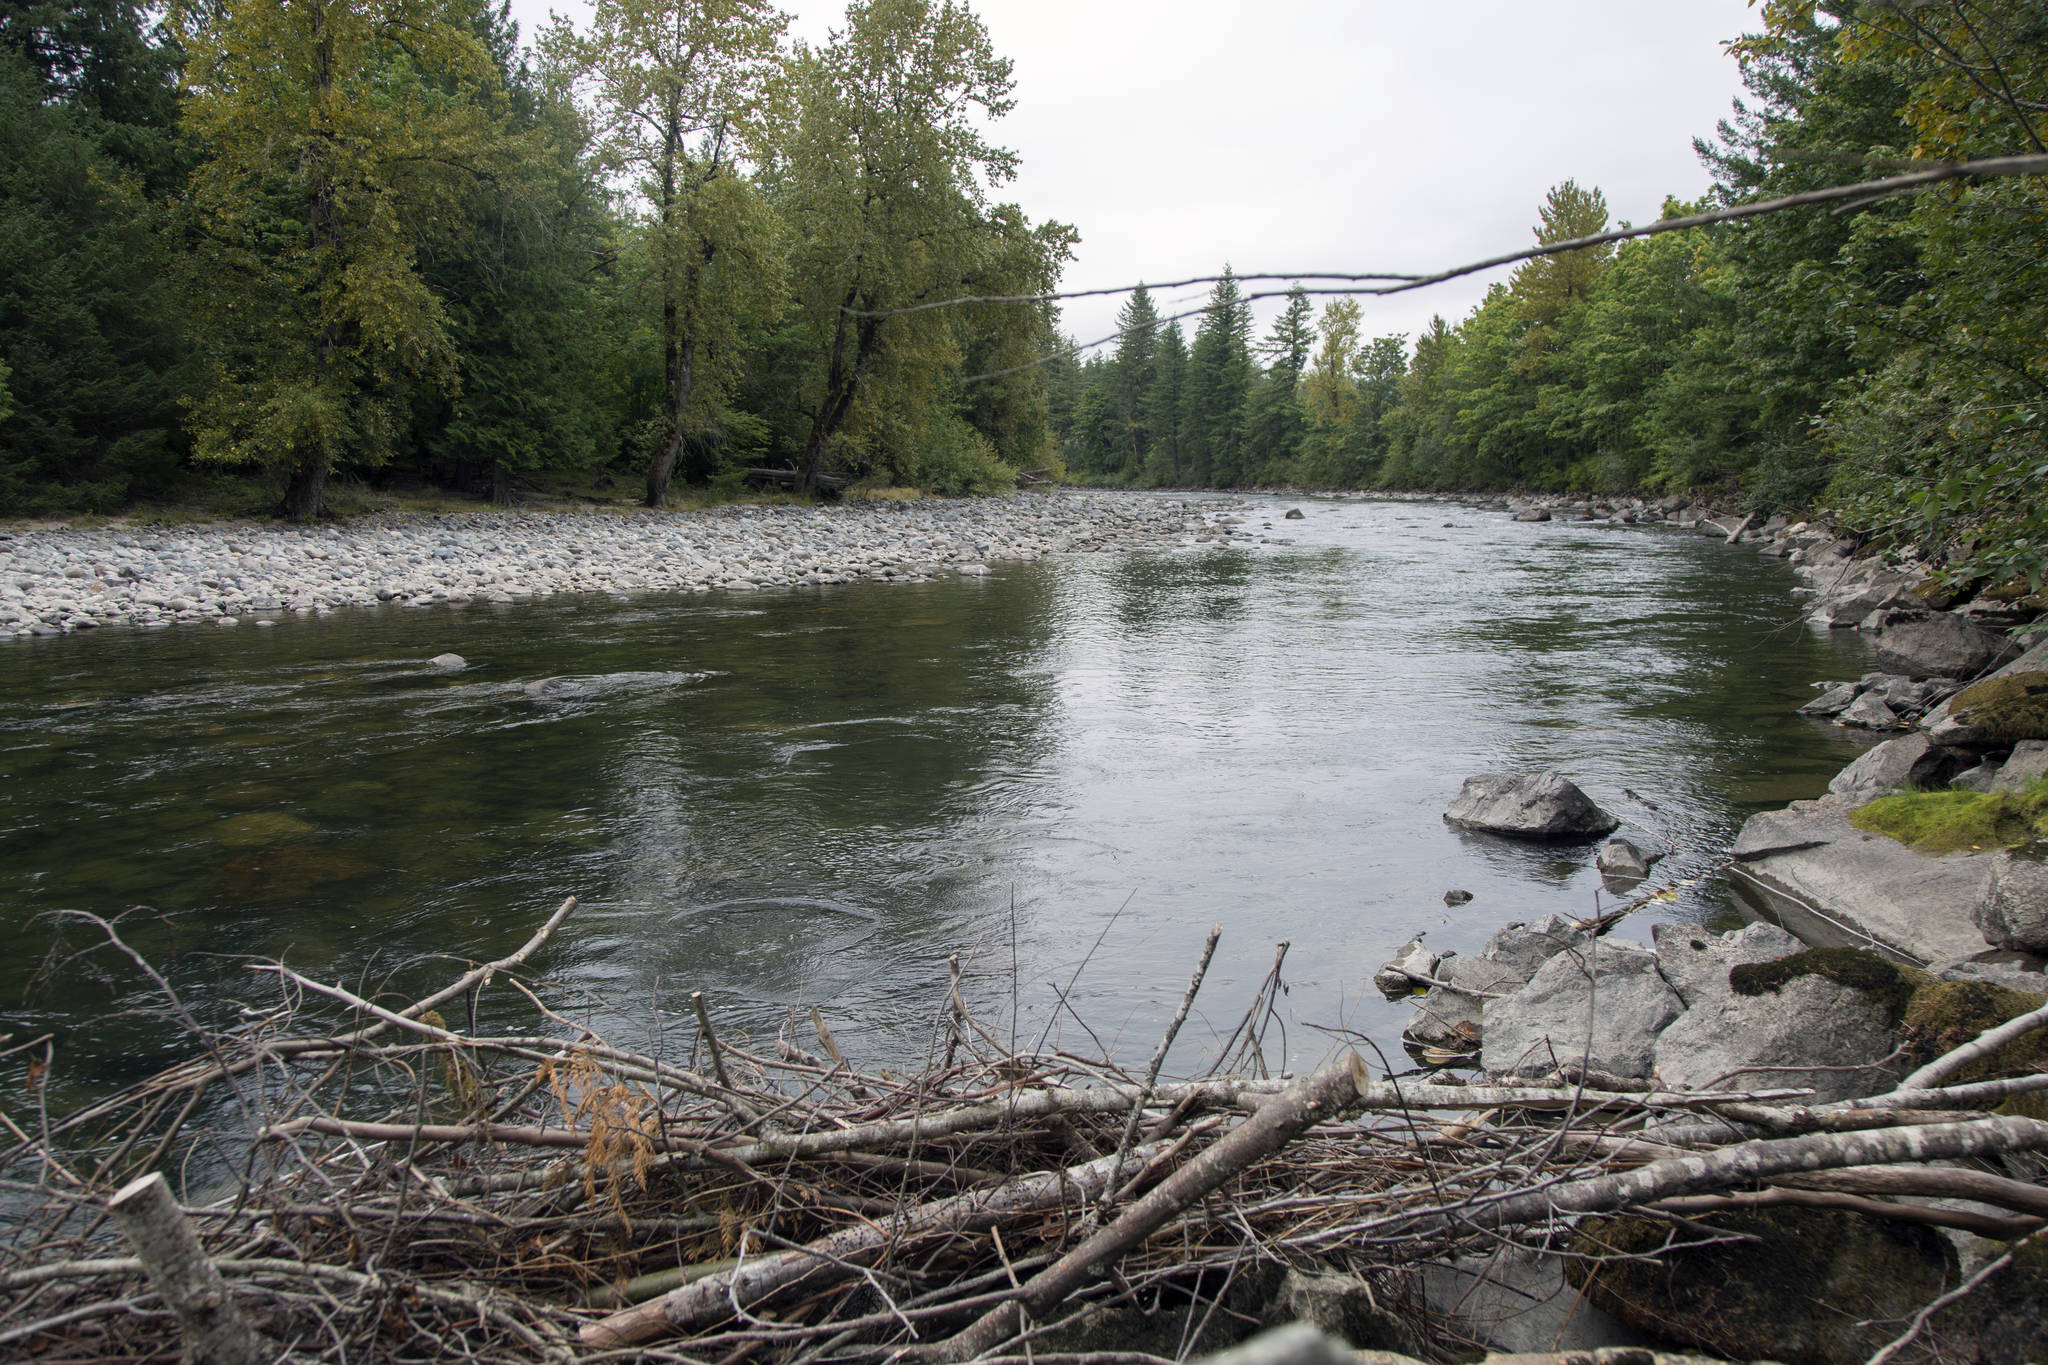 Flood watch issued for Snoqualmie River